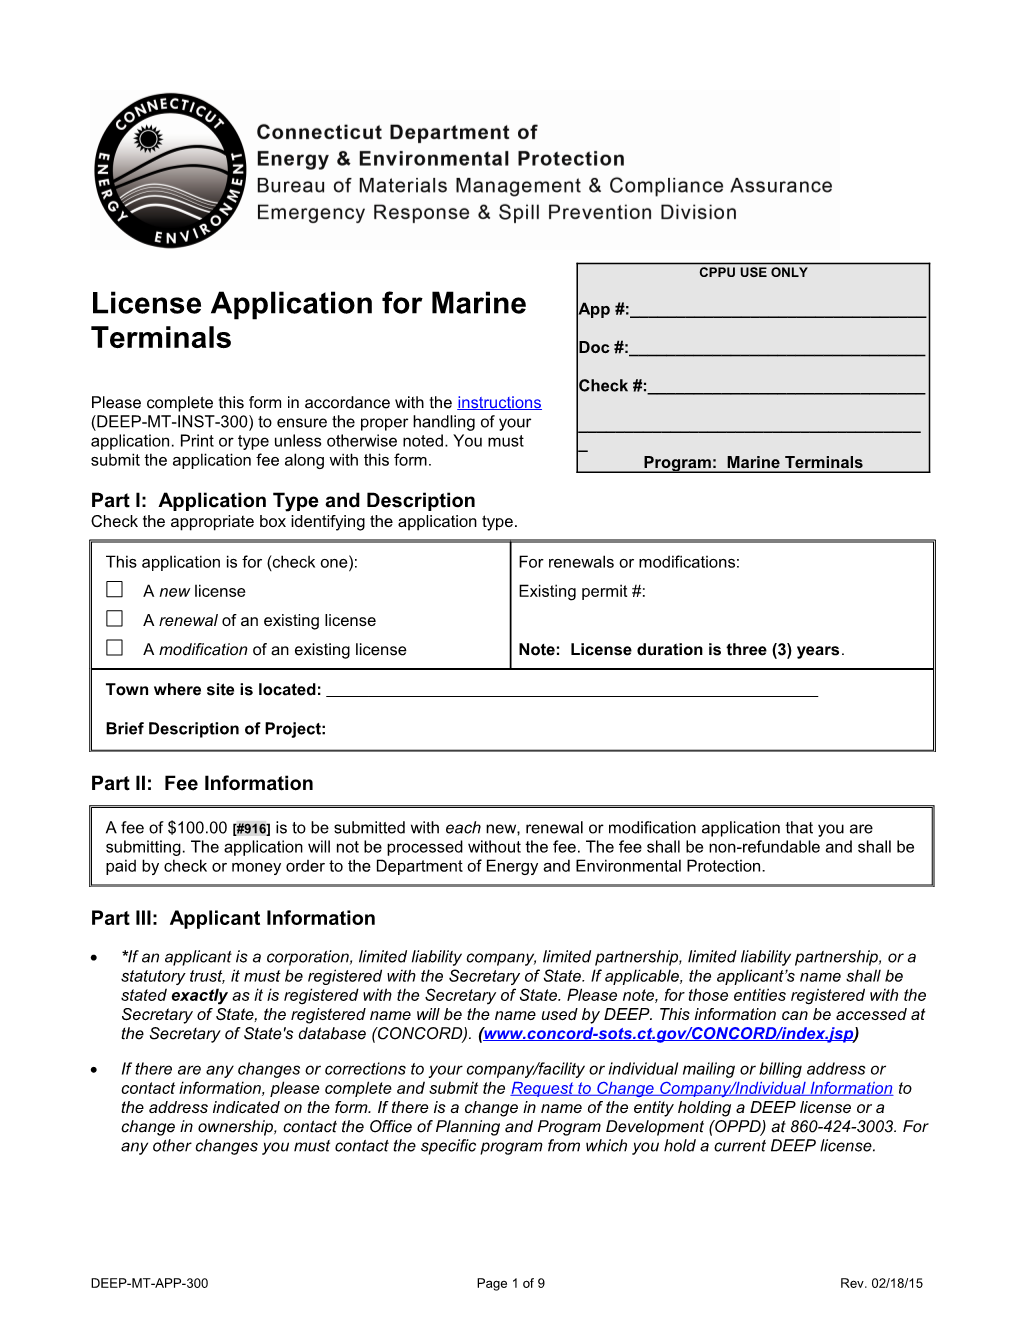 License Application for Marine Terminals